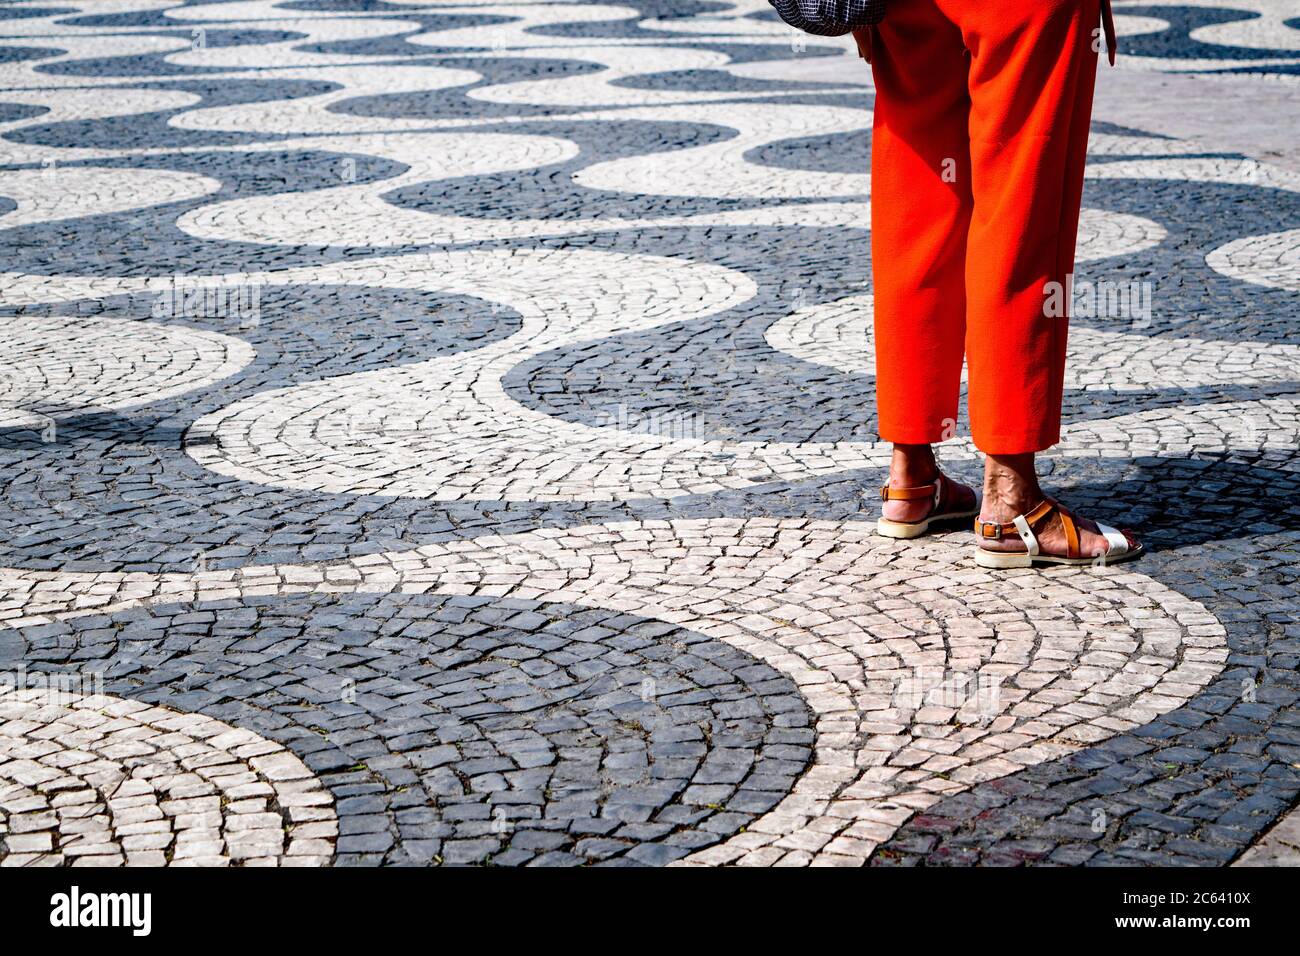 A woman's orange pants create a vivid pop of color against the black and white wave-patterned paving stones in Lisbon's Rossio Square. Stock Photo